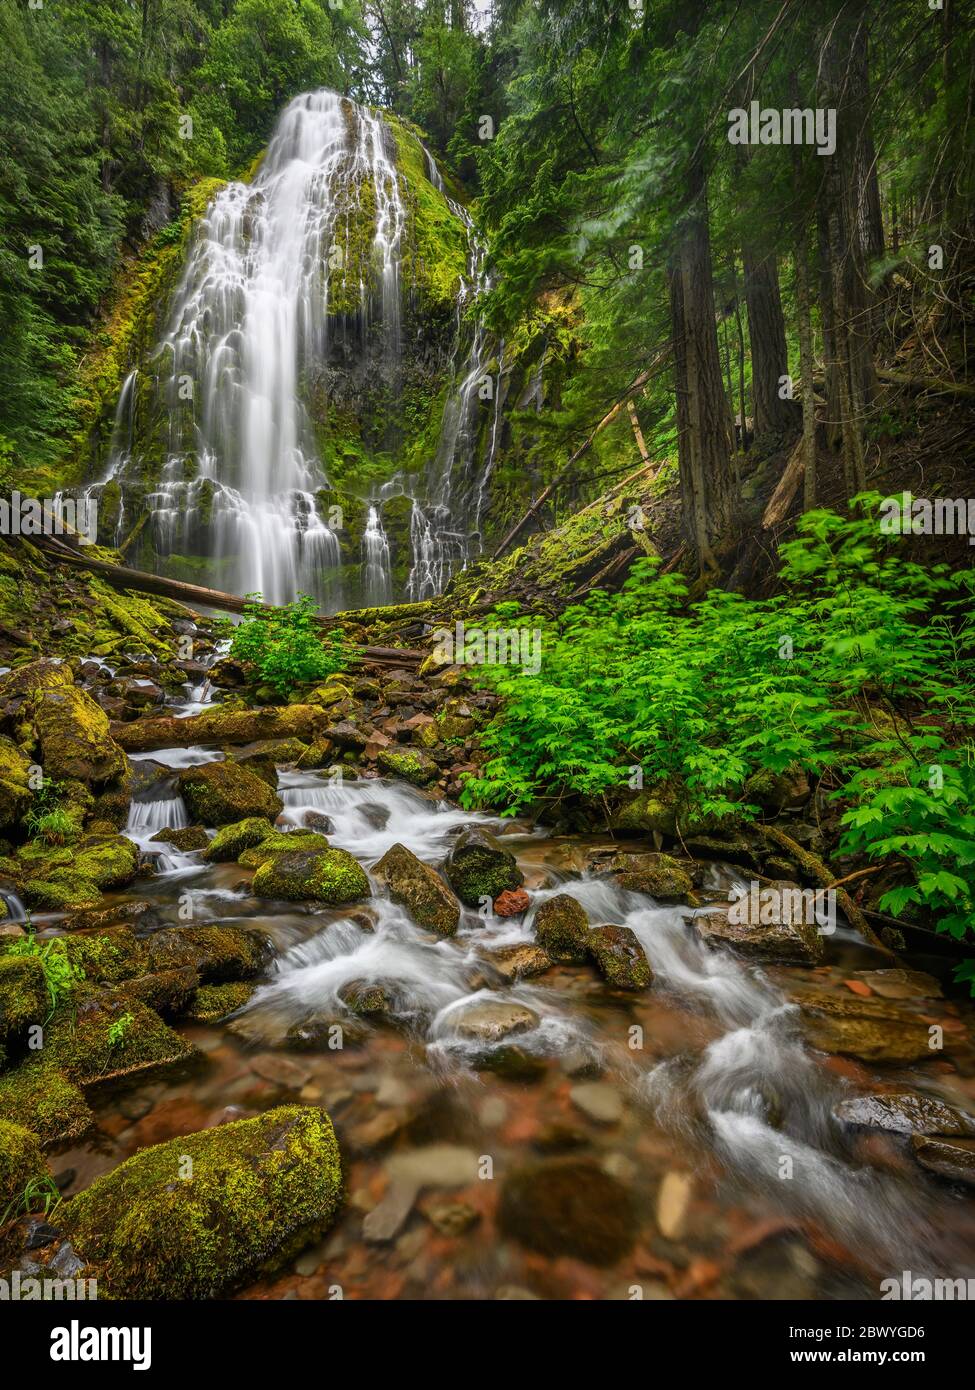 Cascate di Lower Proxy; Proxy Falls Trail, Three Sisters Wilderness, Willamette National Forest, Cascade Mountains, Oregon. Foto Stock